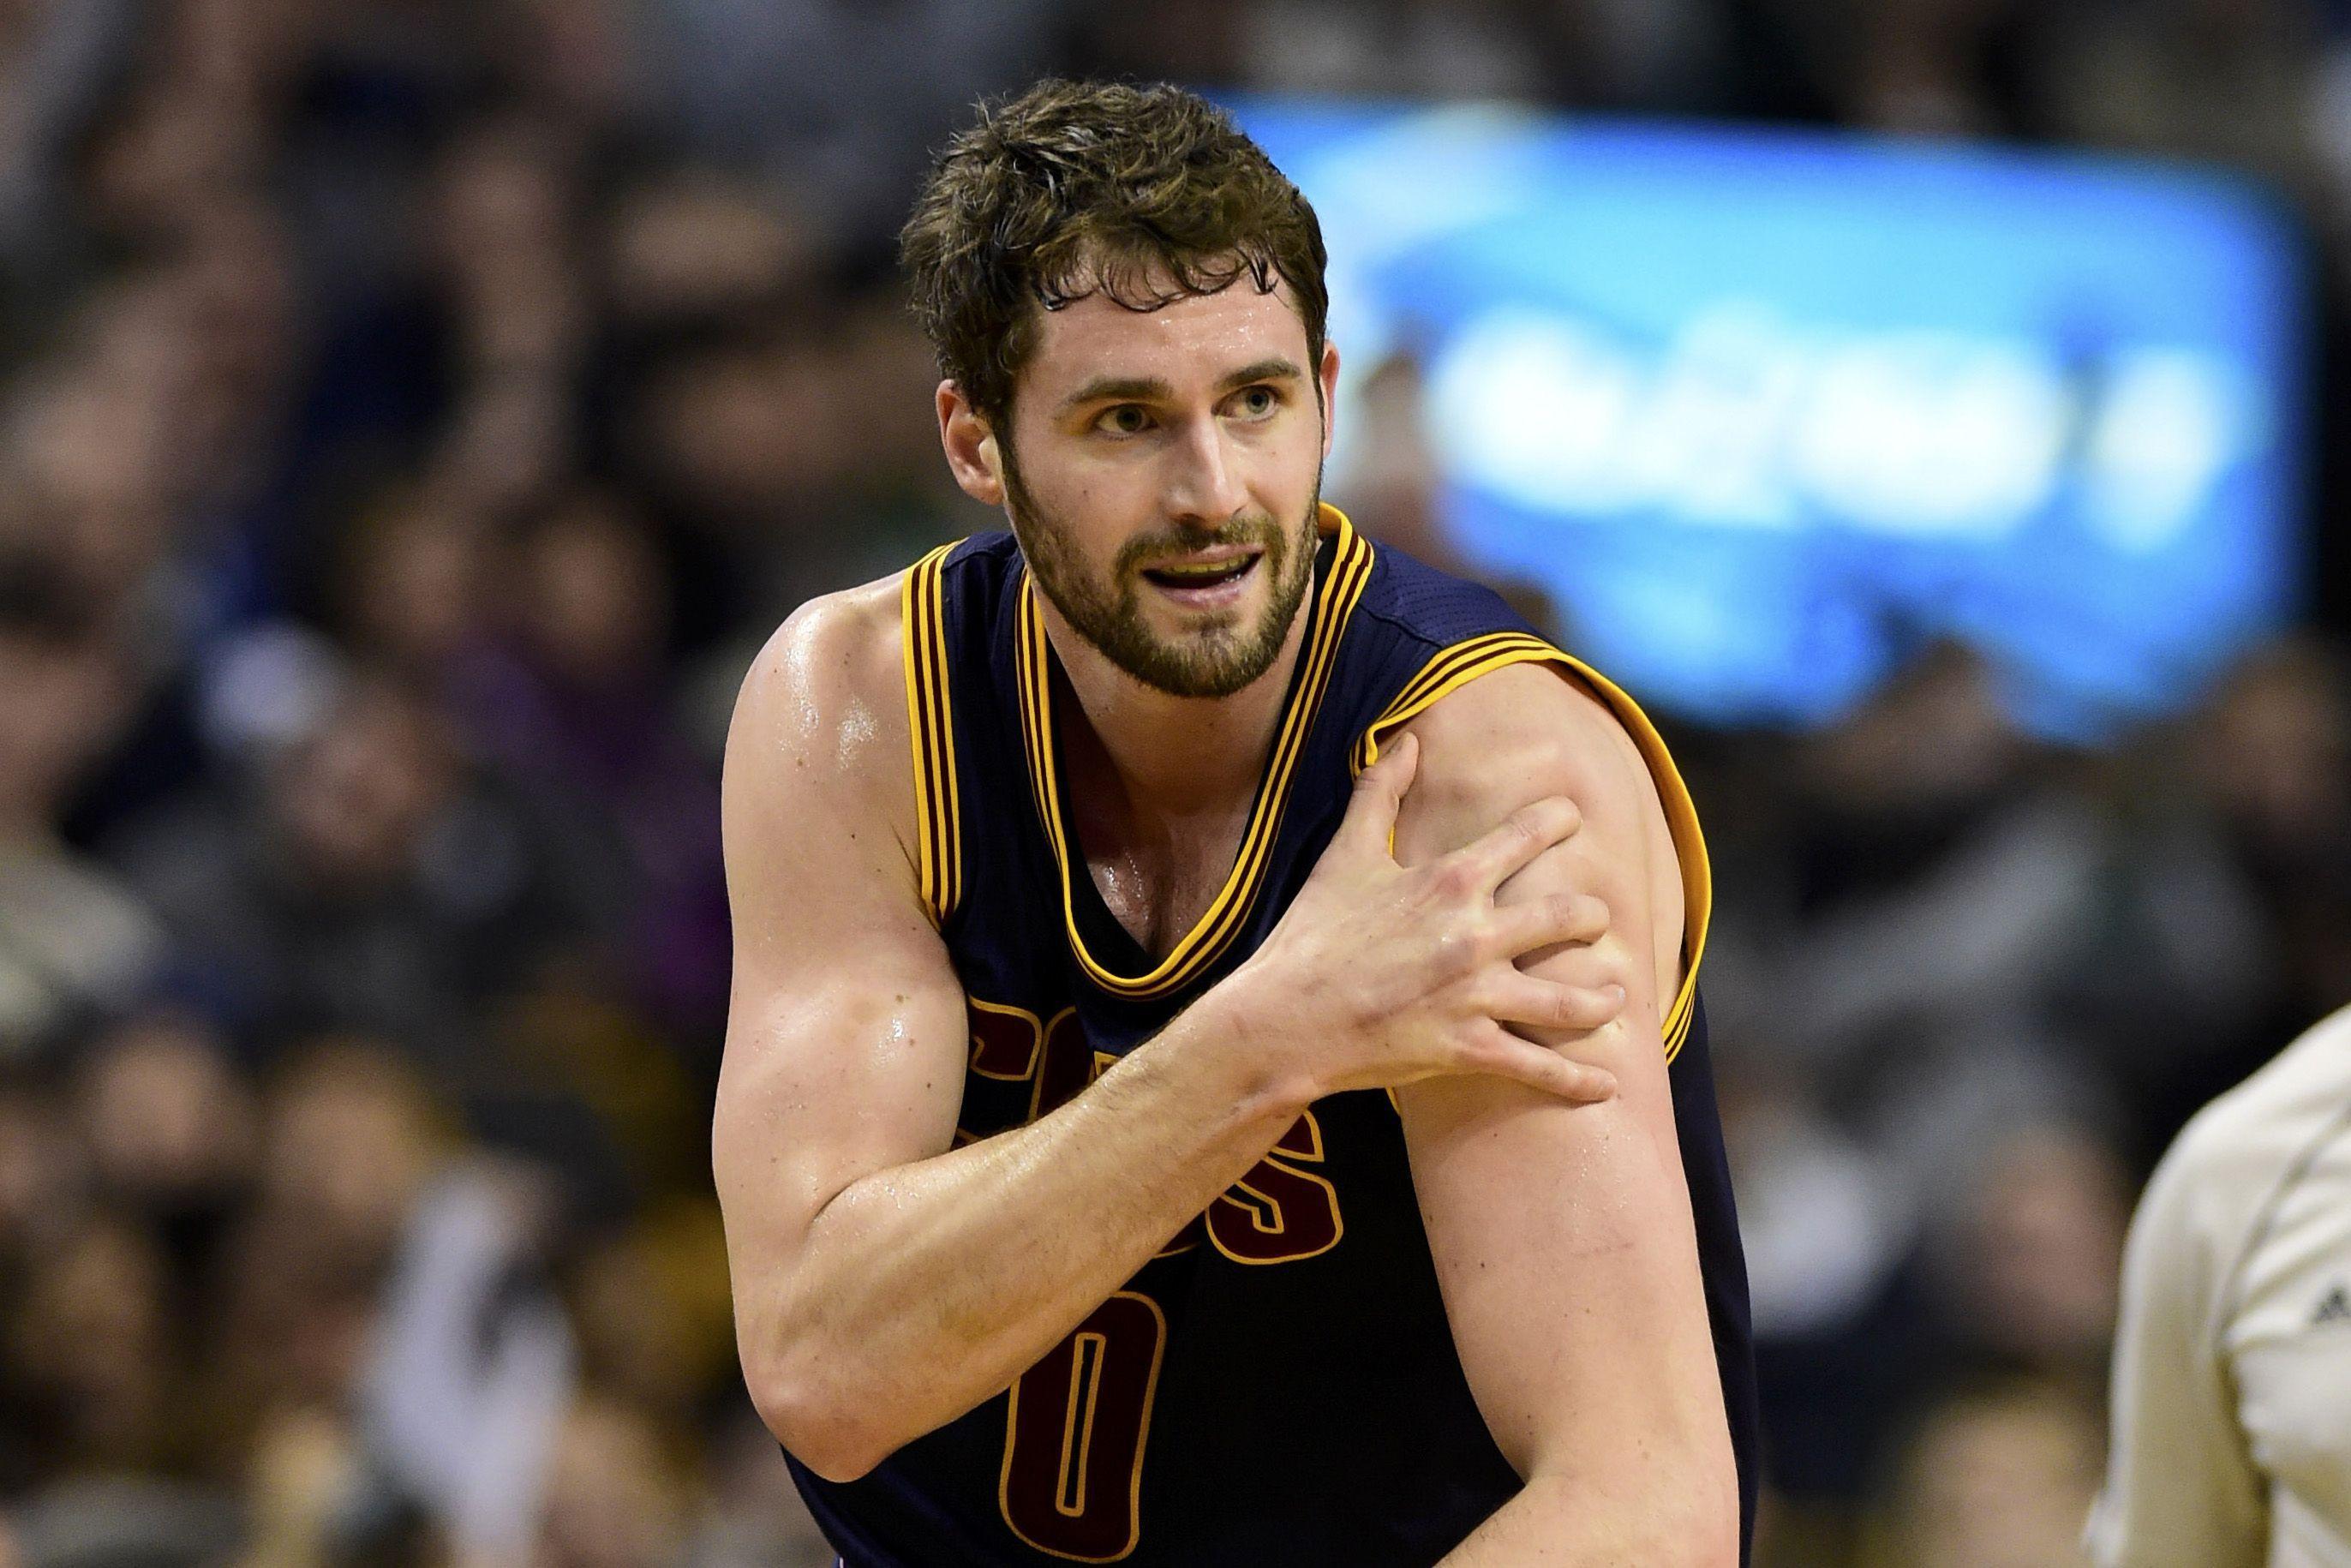 Download Kevin Love 2015 Wallpaper Free #ysdqc hdxwallpaperz.com